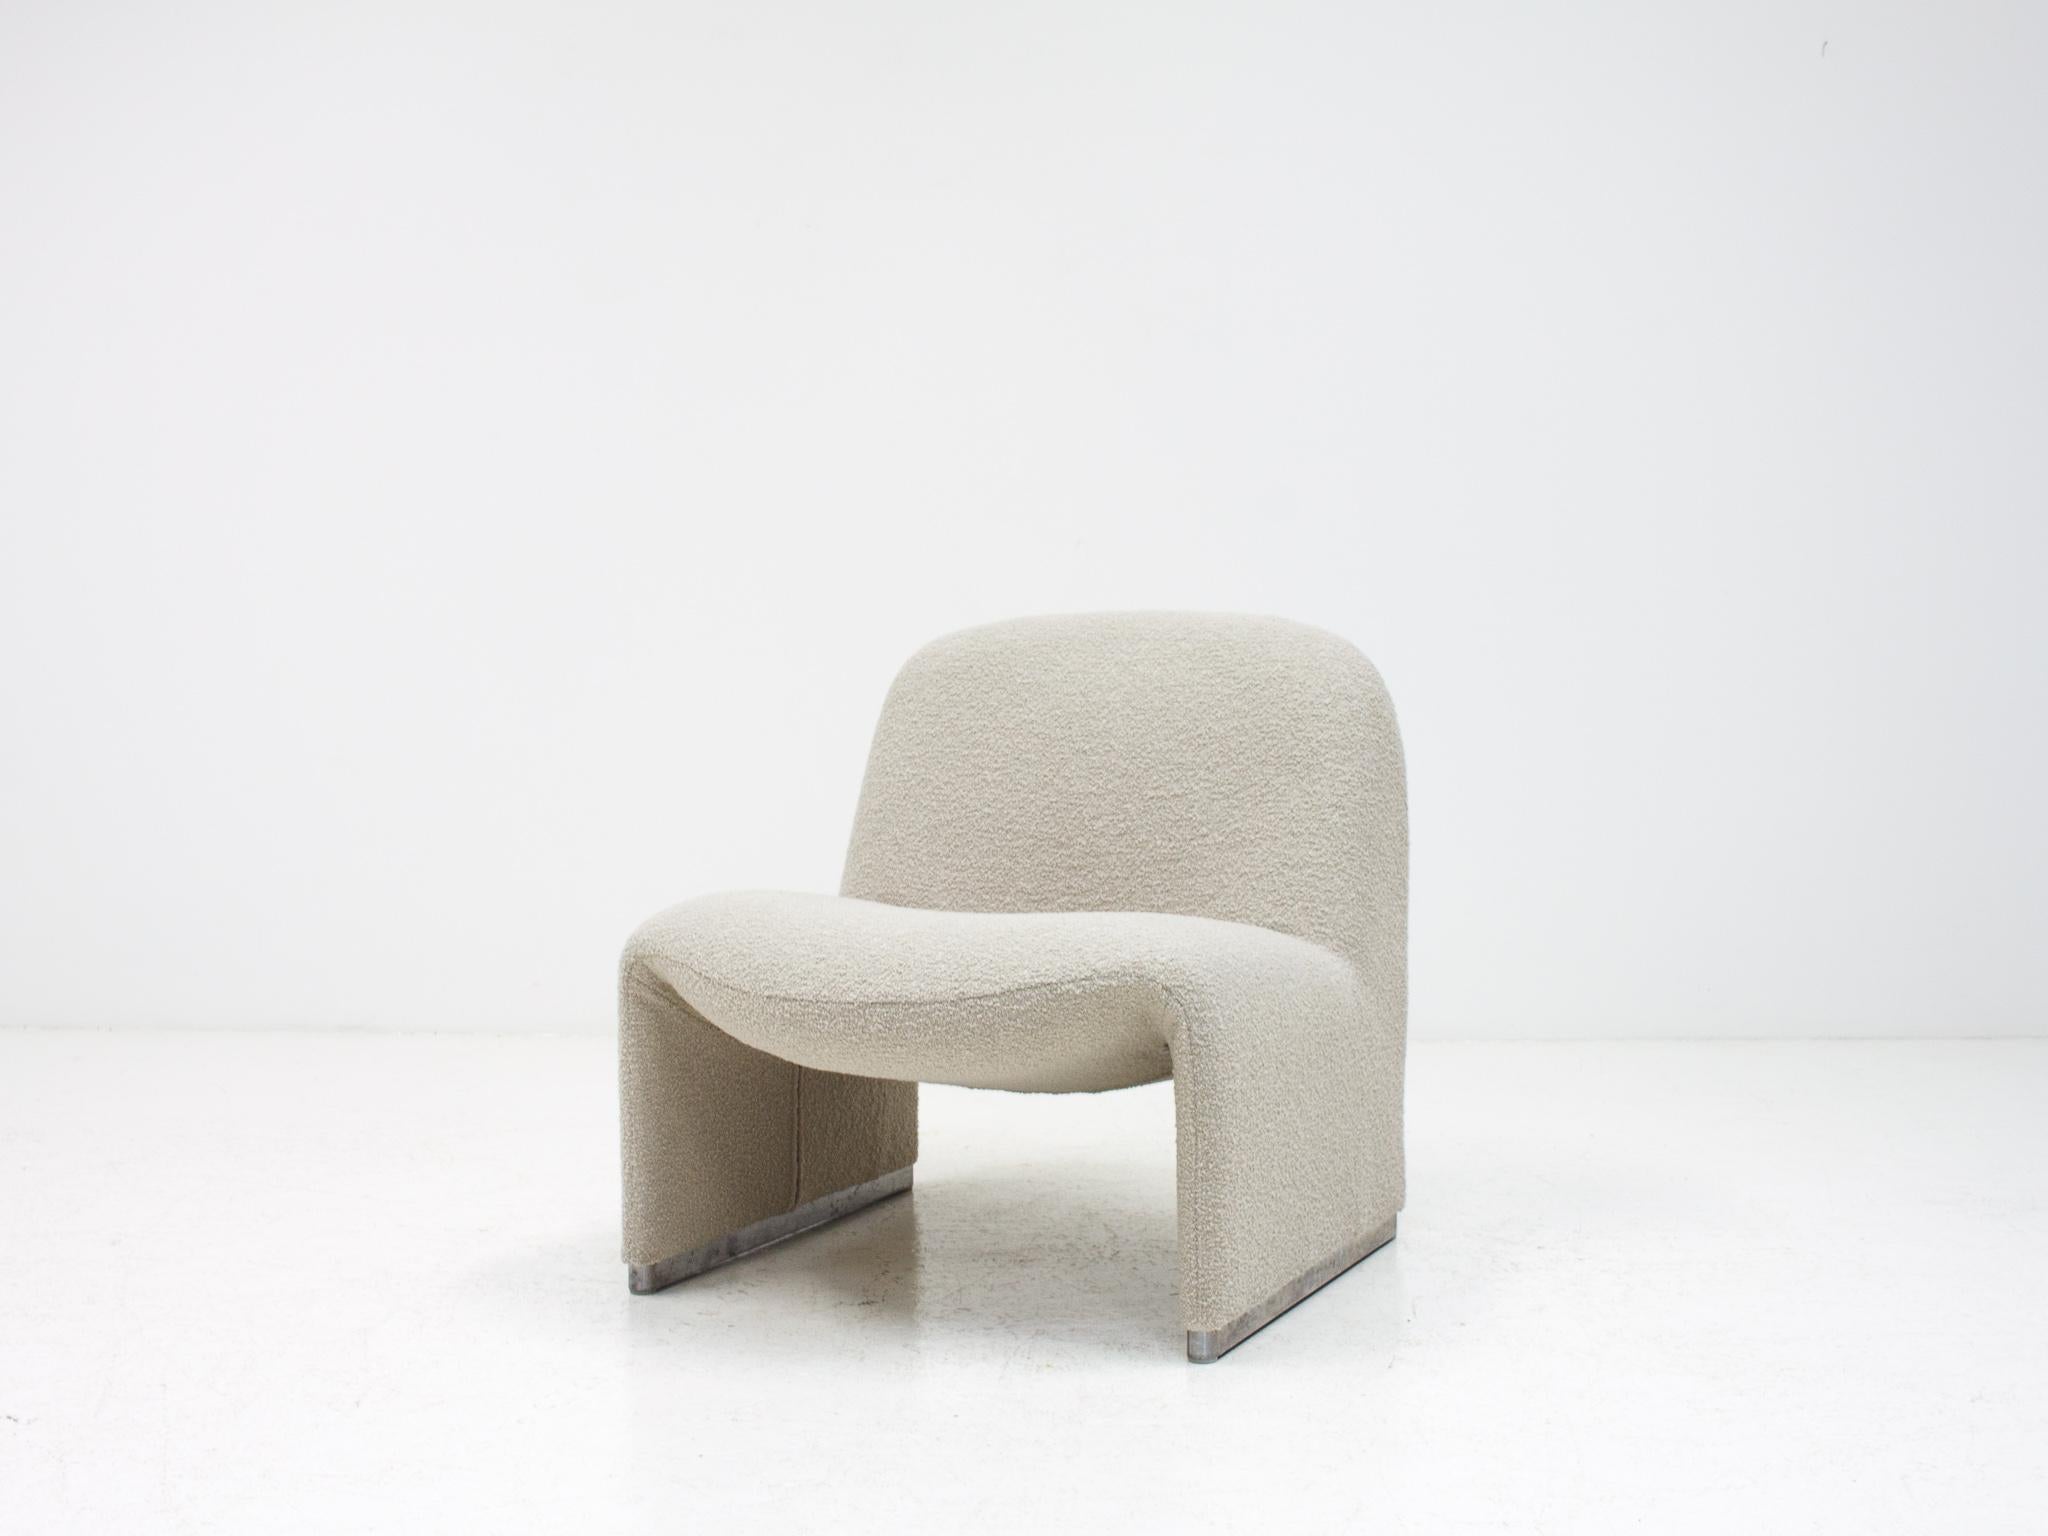 A Giancarlo Piretti “Alky” chair newly upholstered in a 'Flax' colored Yarn Collective bouclé fabric. The fabric is grey in appearance with a very pale olive hue, we have included two fabric screenshots from the manufacturer's website but the colour